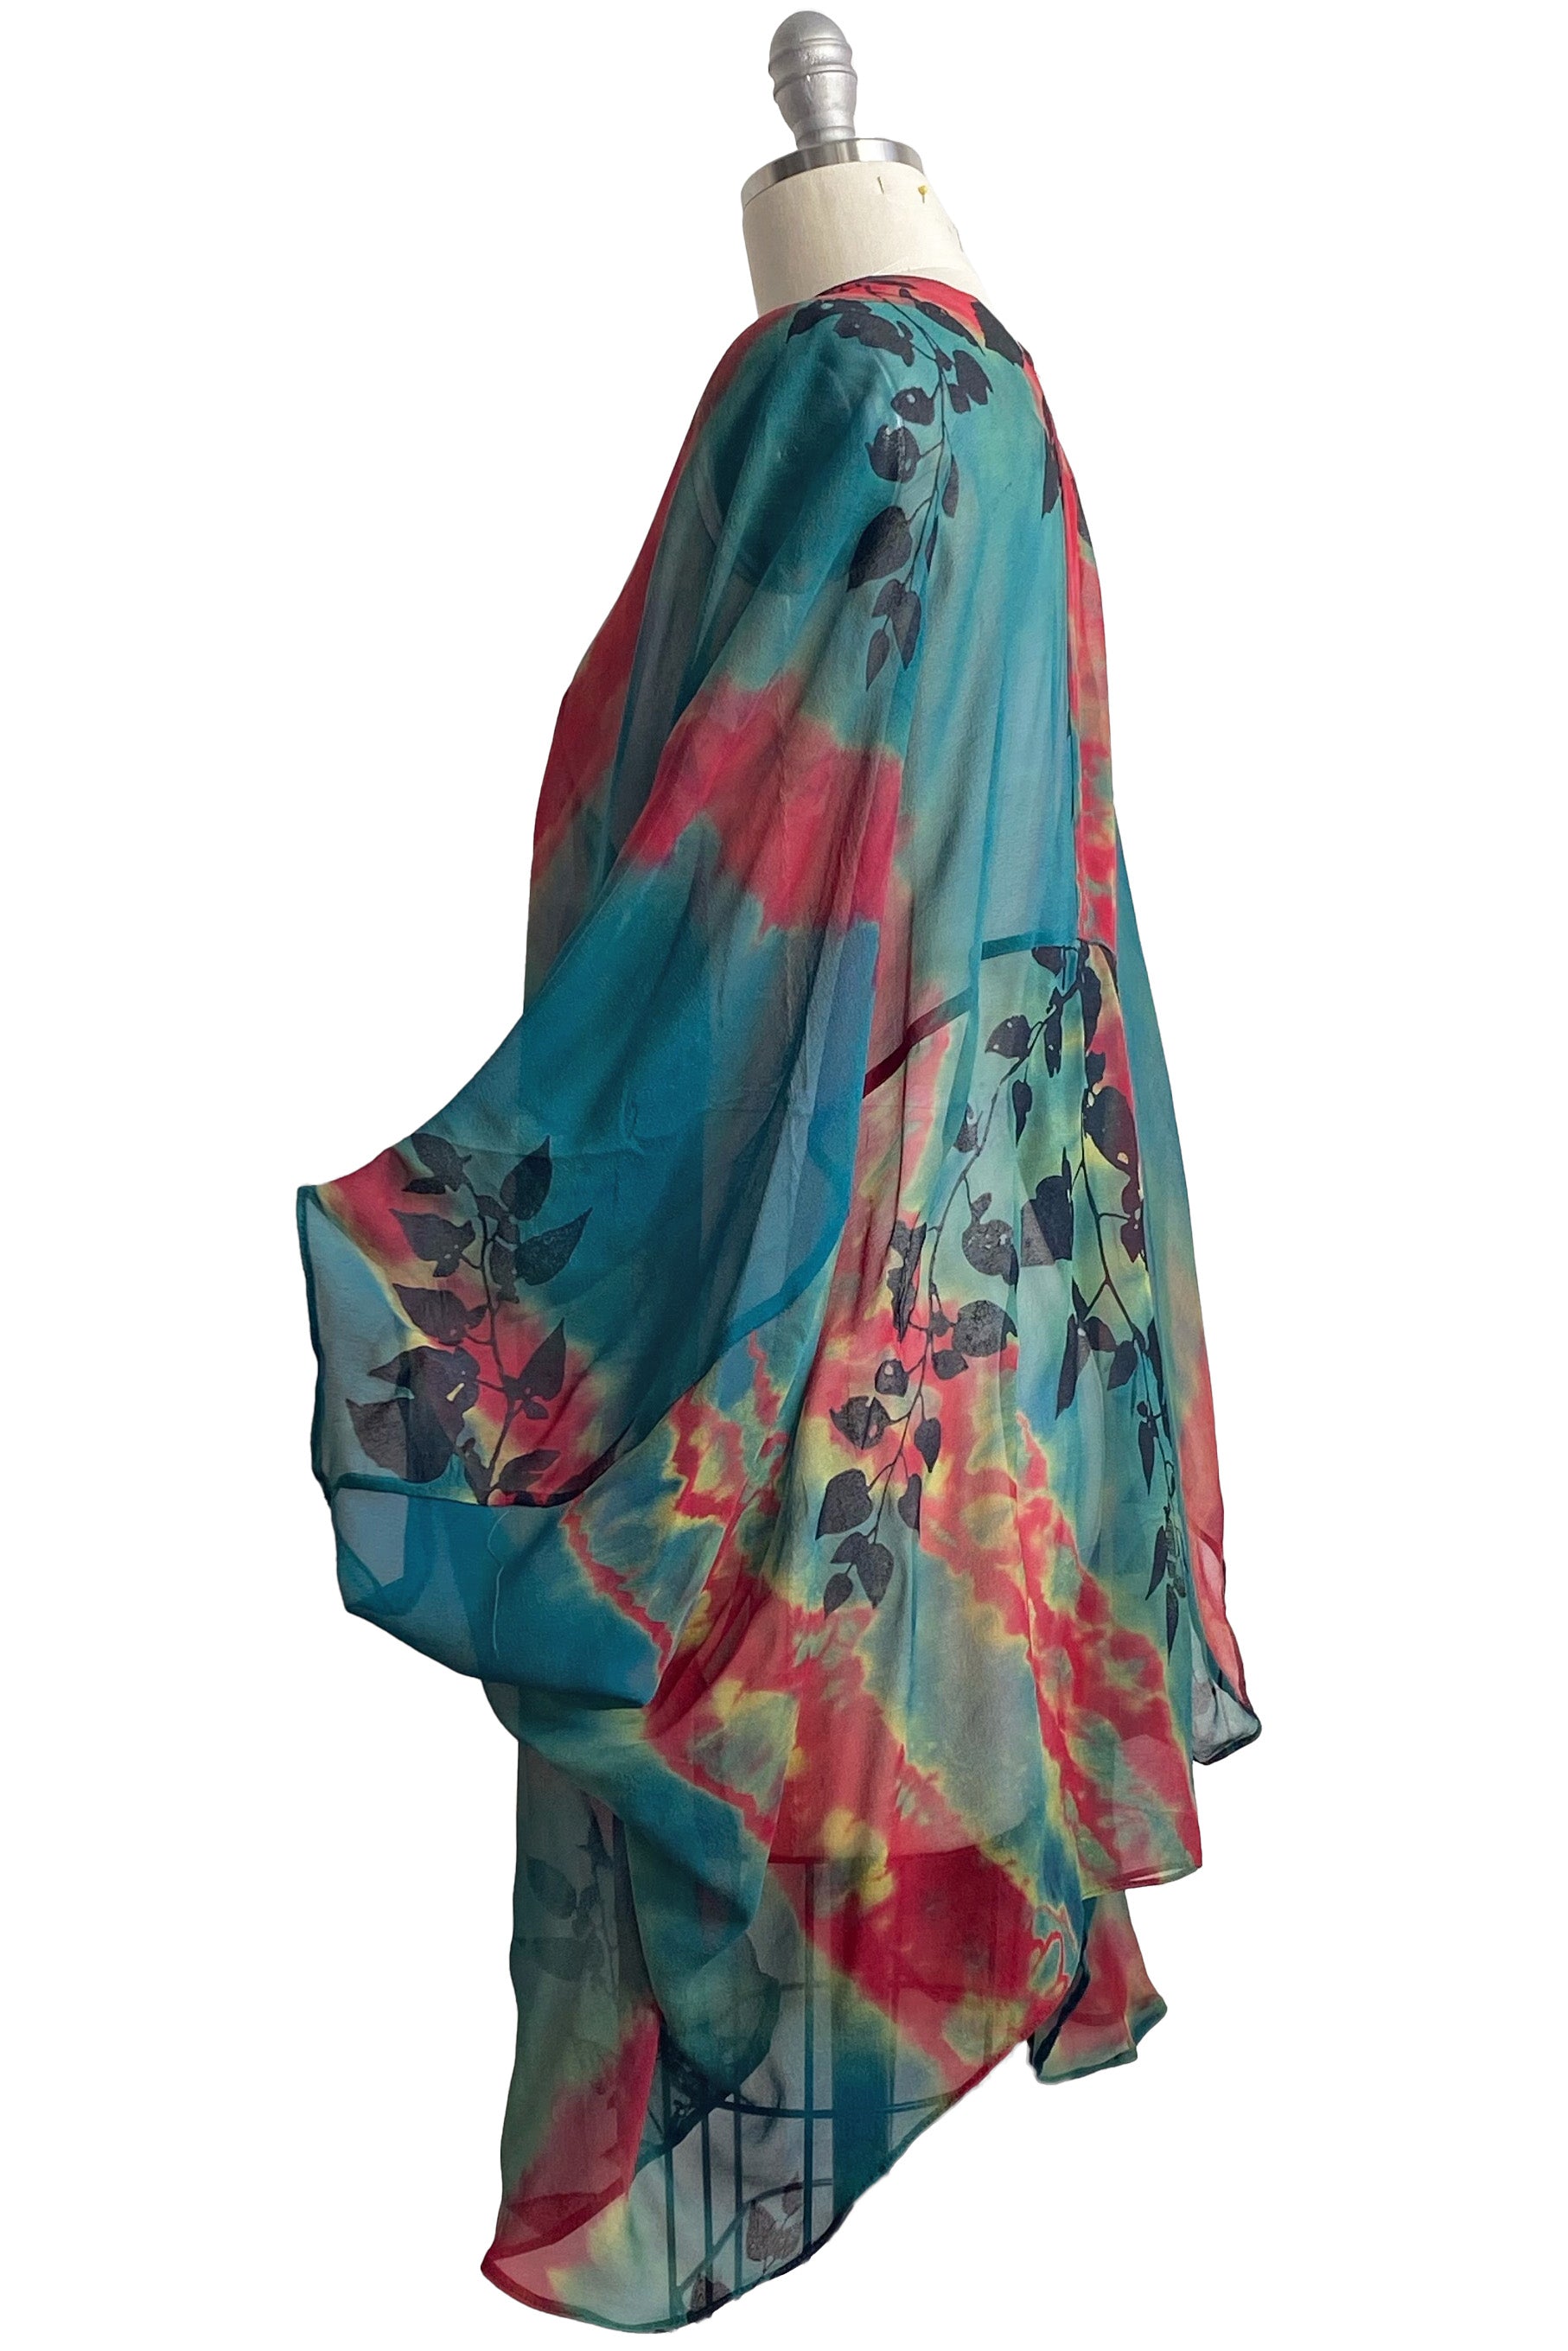 Cocoon w/ Vine Print - Turquoise Blue & Red